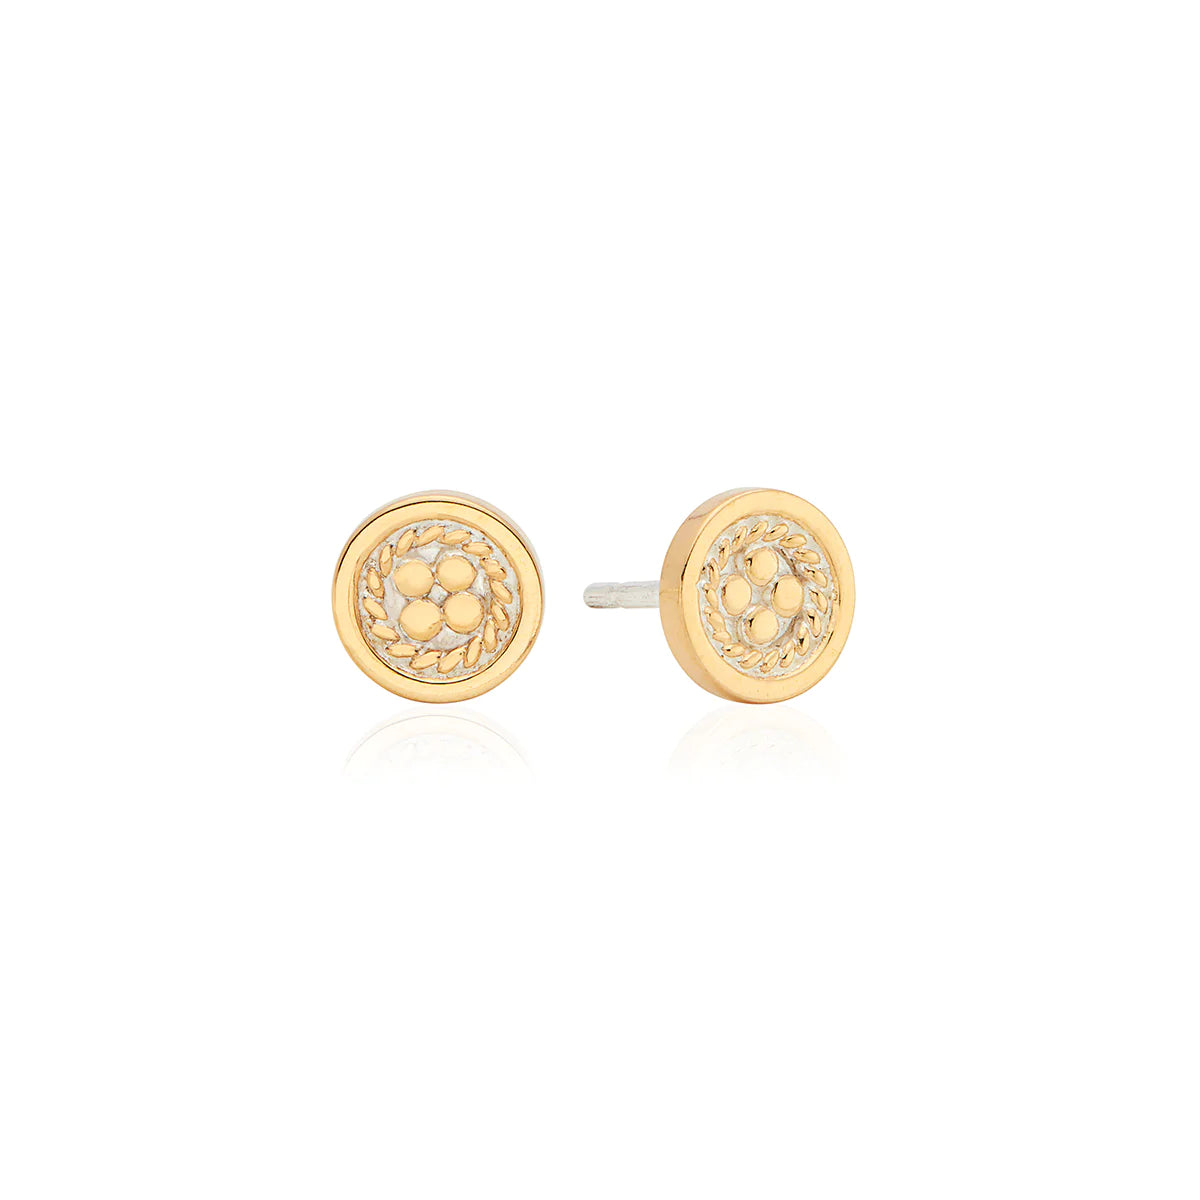 Small gold studs with dot details and rope trim